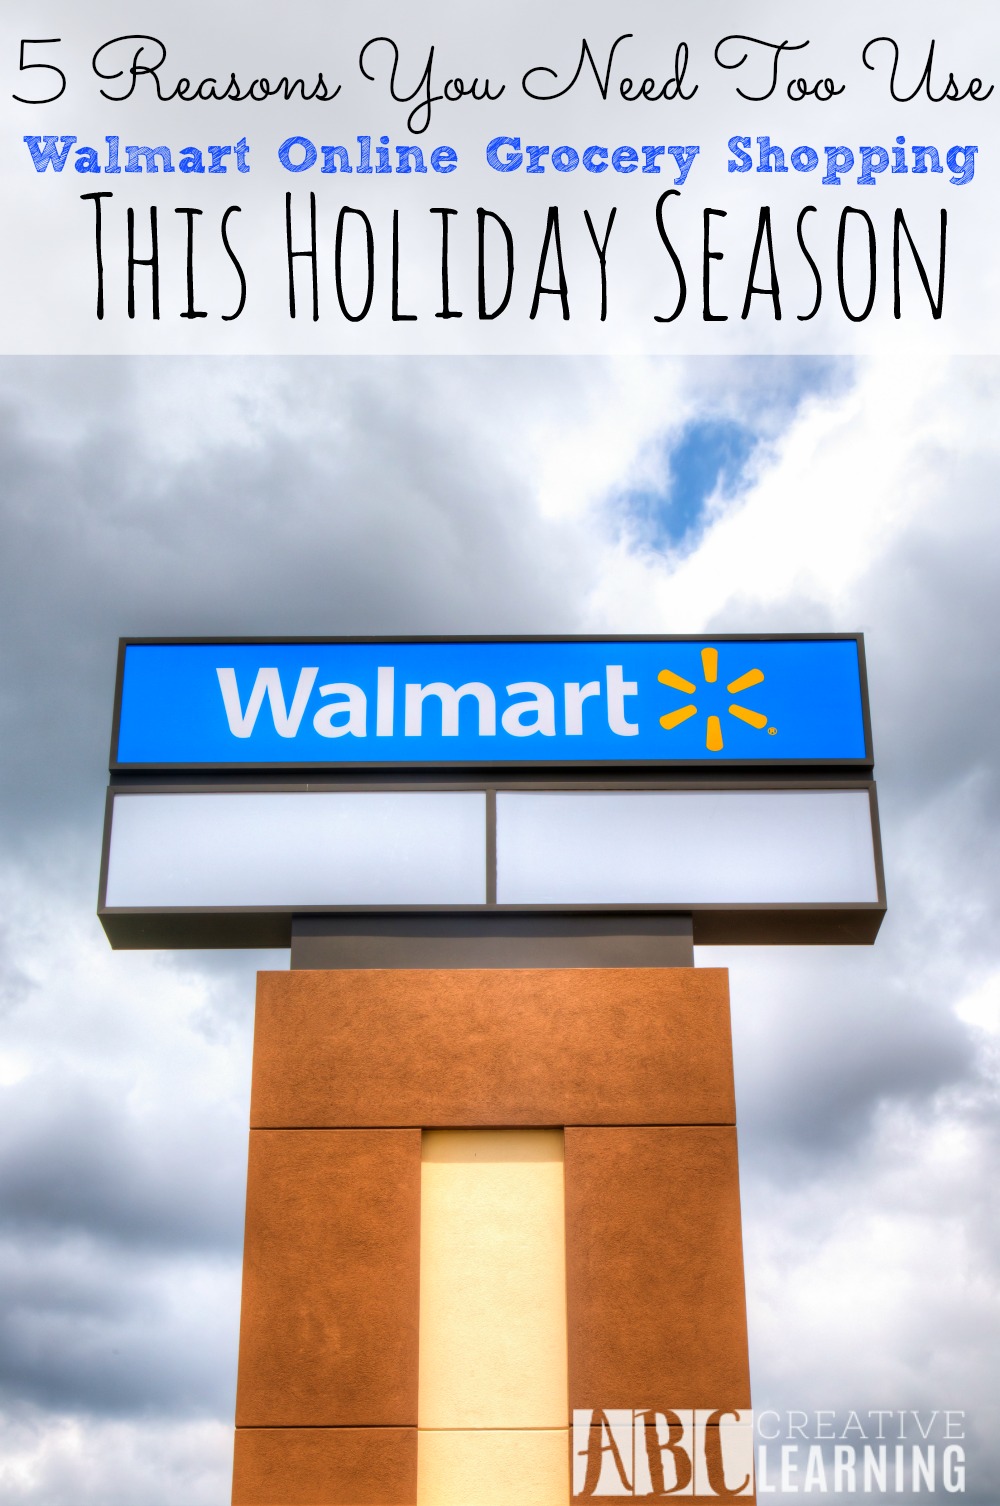 5 Reasons You Need To Use Walmart Online Grocery Shopping This Holiday Season